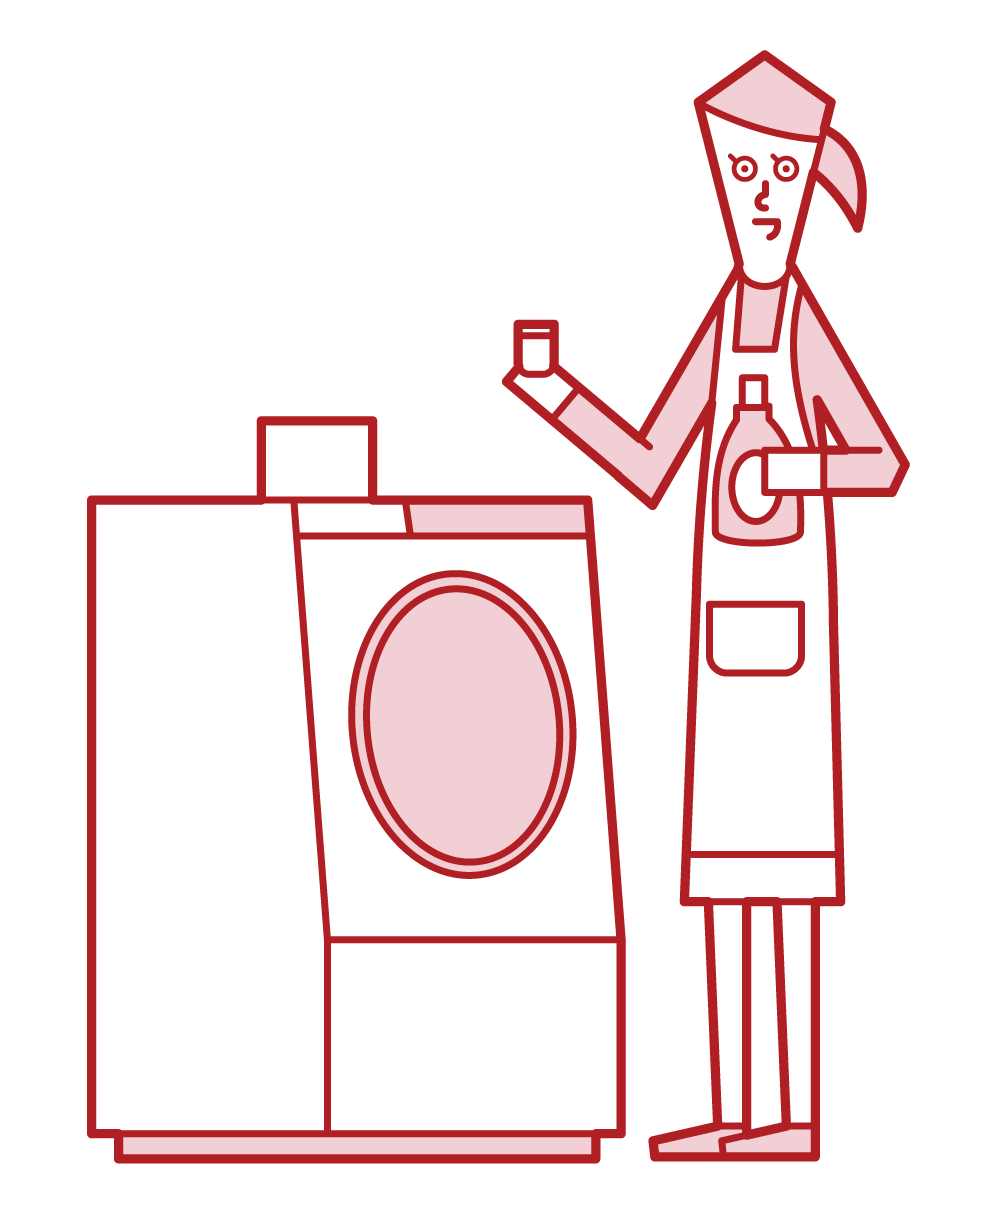 Illustration of a woman who put detergent and softener in a washing machine